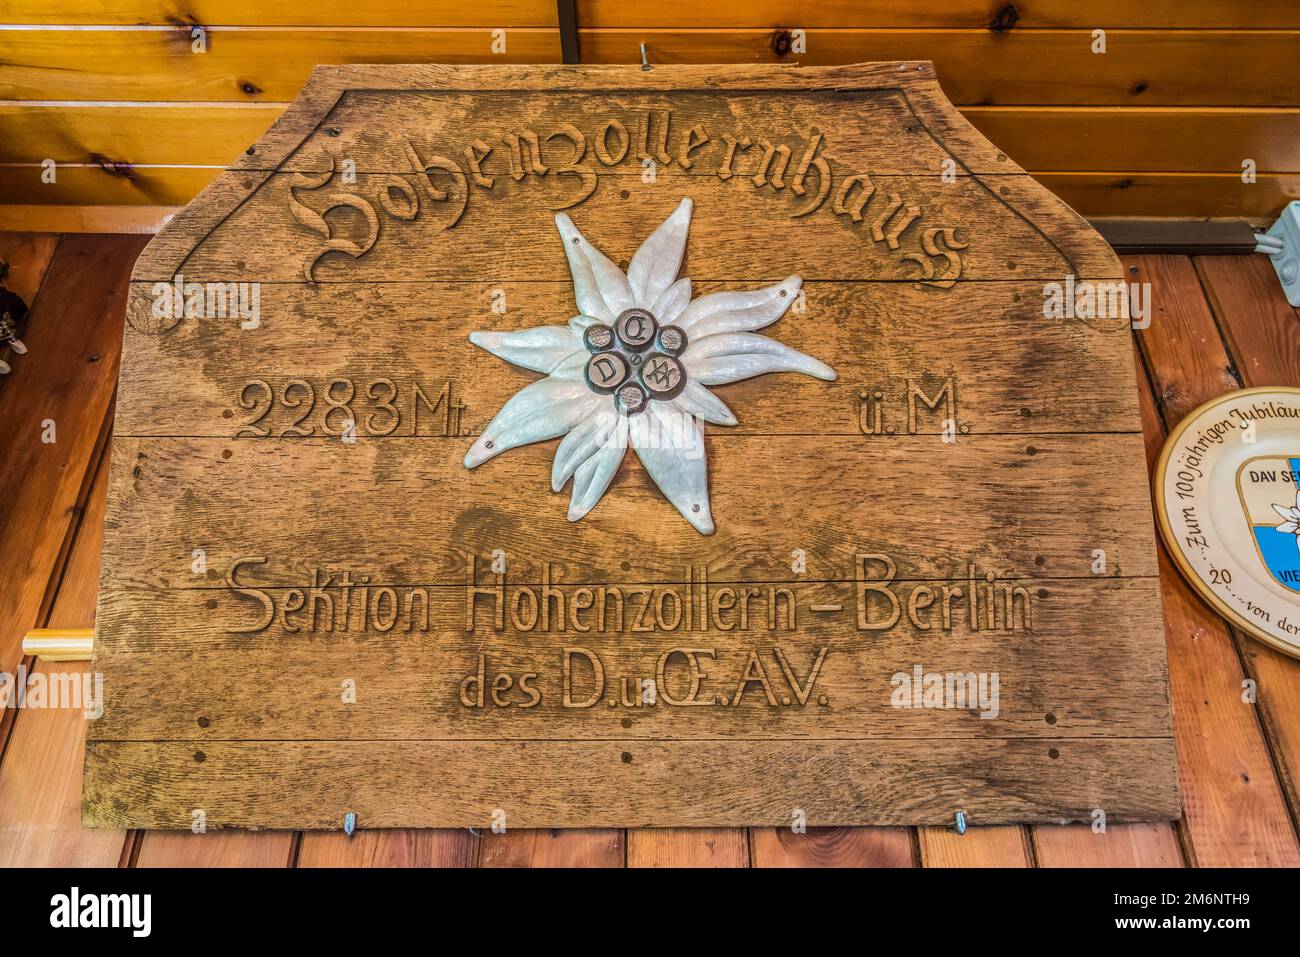 General image of the original wooden hut plaque sign at the German Alpine Club DAV Sektion Berlin owned Hohenzollern Haus mountain refuge high above the Redurschertal valley and Radurscheralm  near the village of Pfunds in the Oetztal Alps of the Austrian Tirol Stock Photo